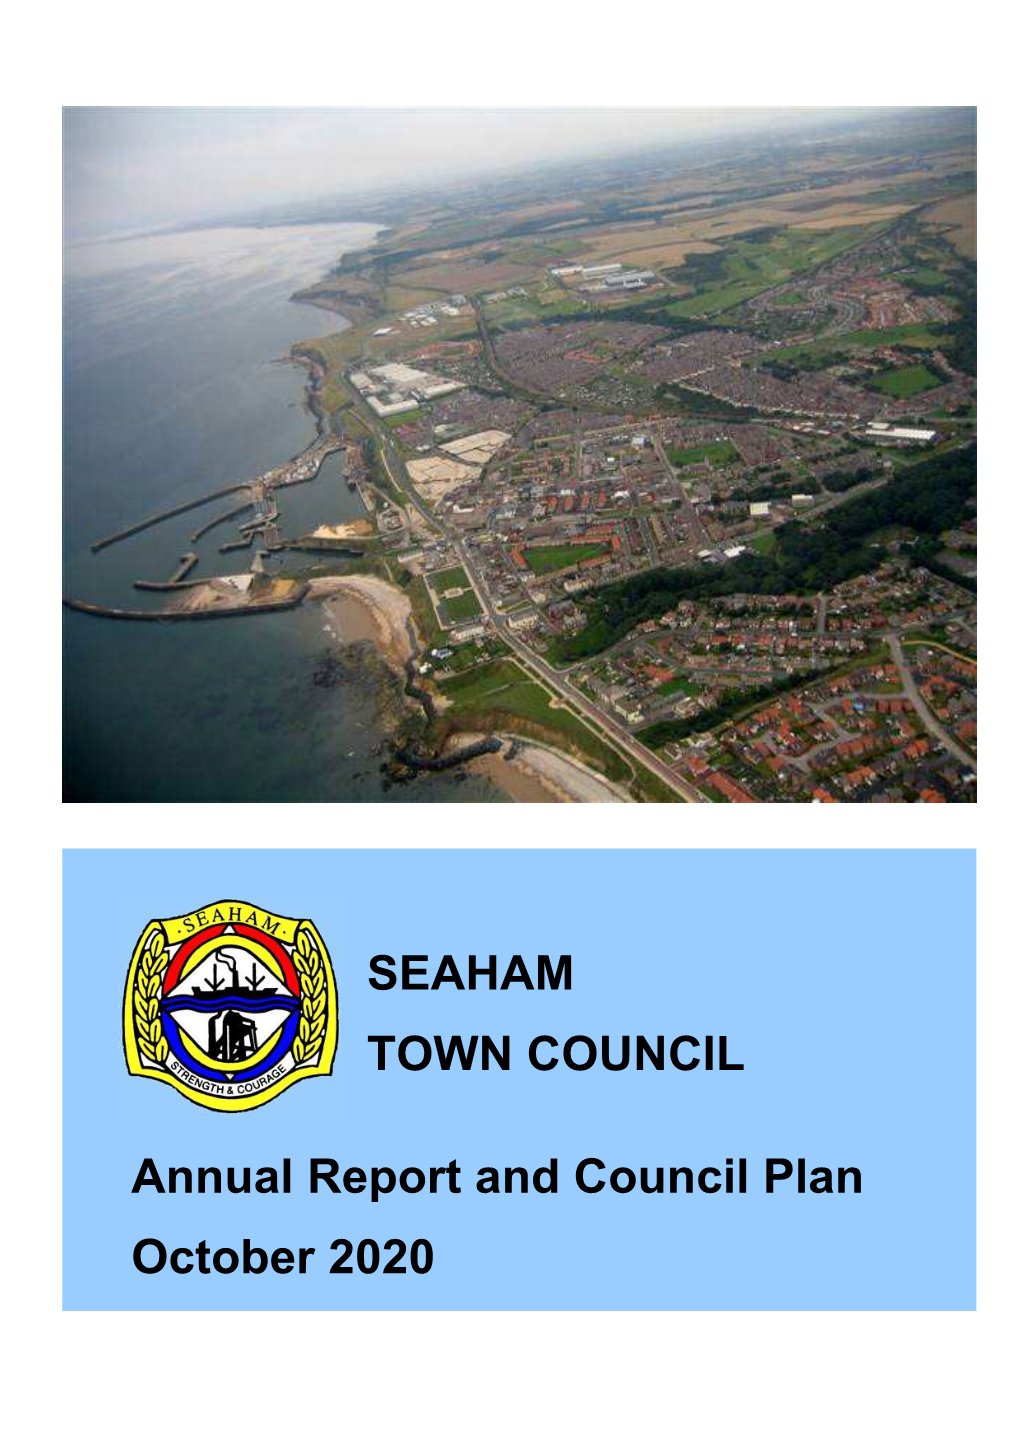 Annual Report and Council Plan 2020